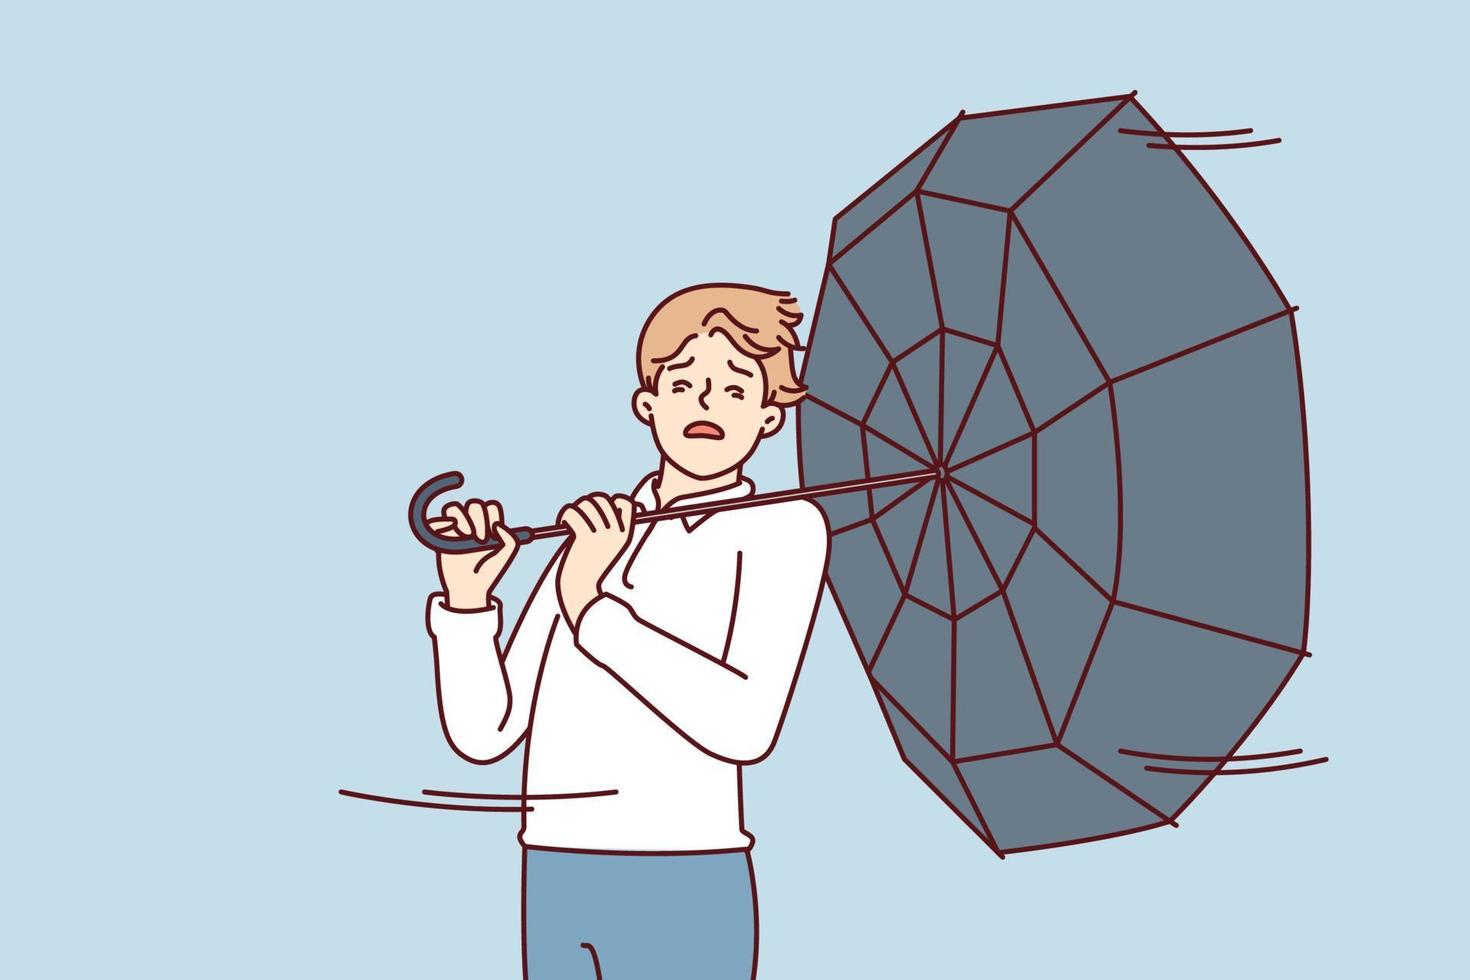 Man with umbrella turned backwards walks down street during severe life-threatening storm. Pedestrian in casual clothes caught in hurricane walking around city and needs shelter. Flat vector design